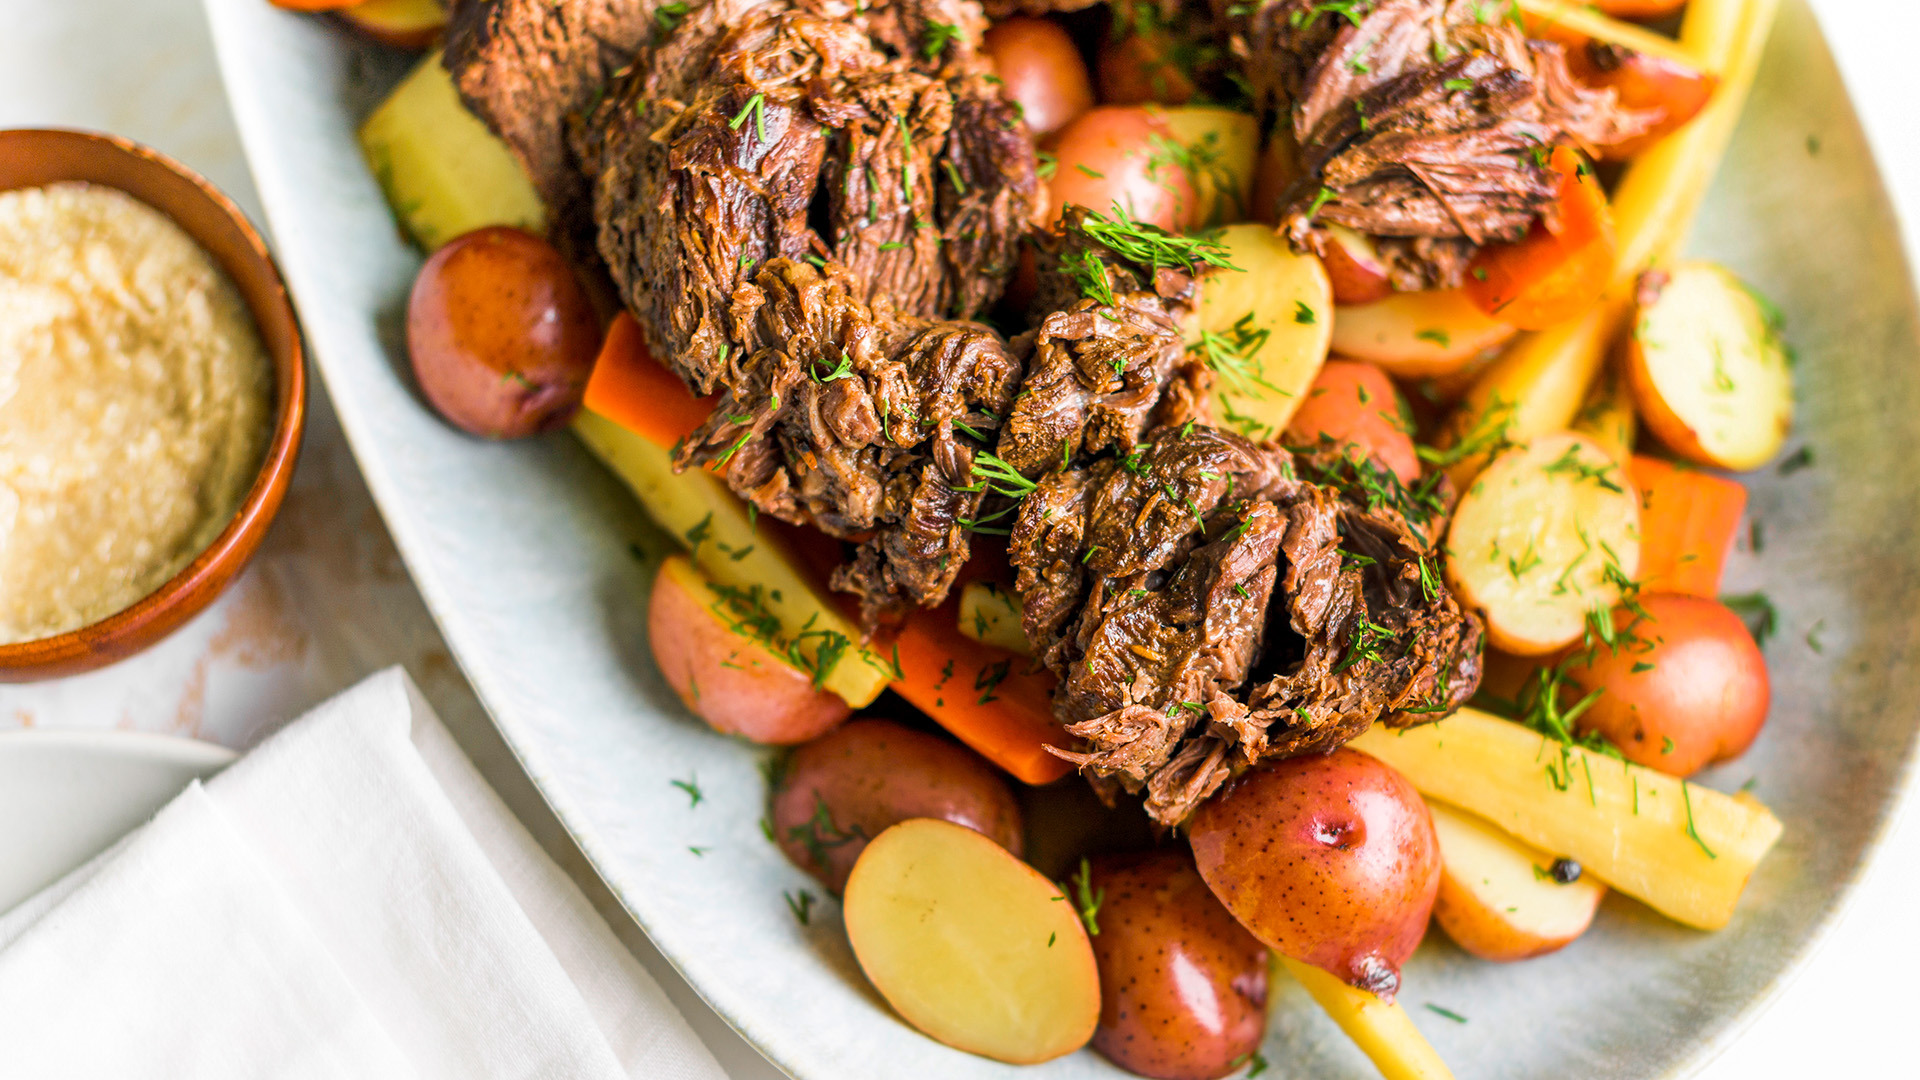 One Pan Beef Roast with Root Vegetables